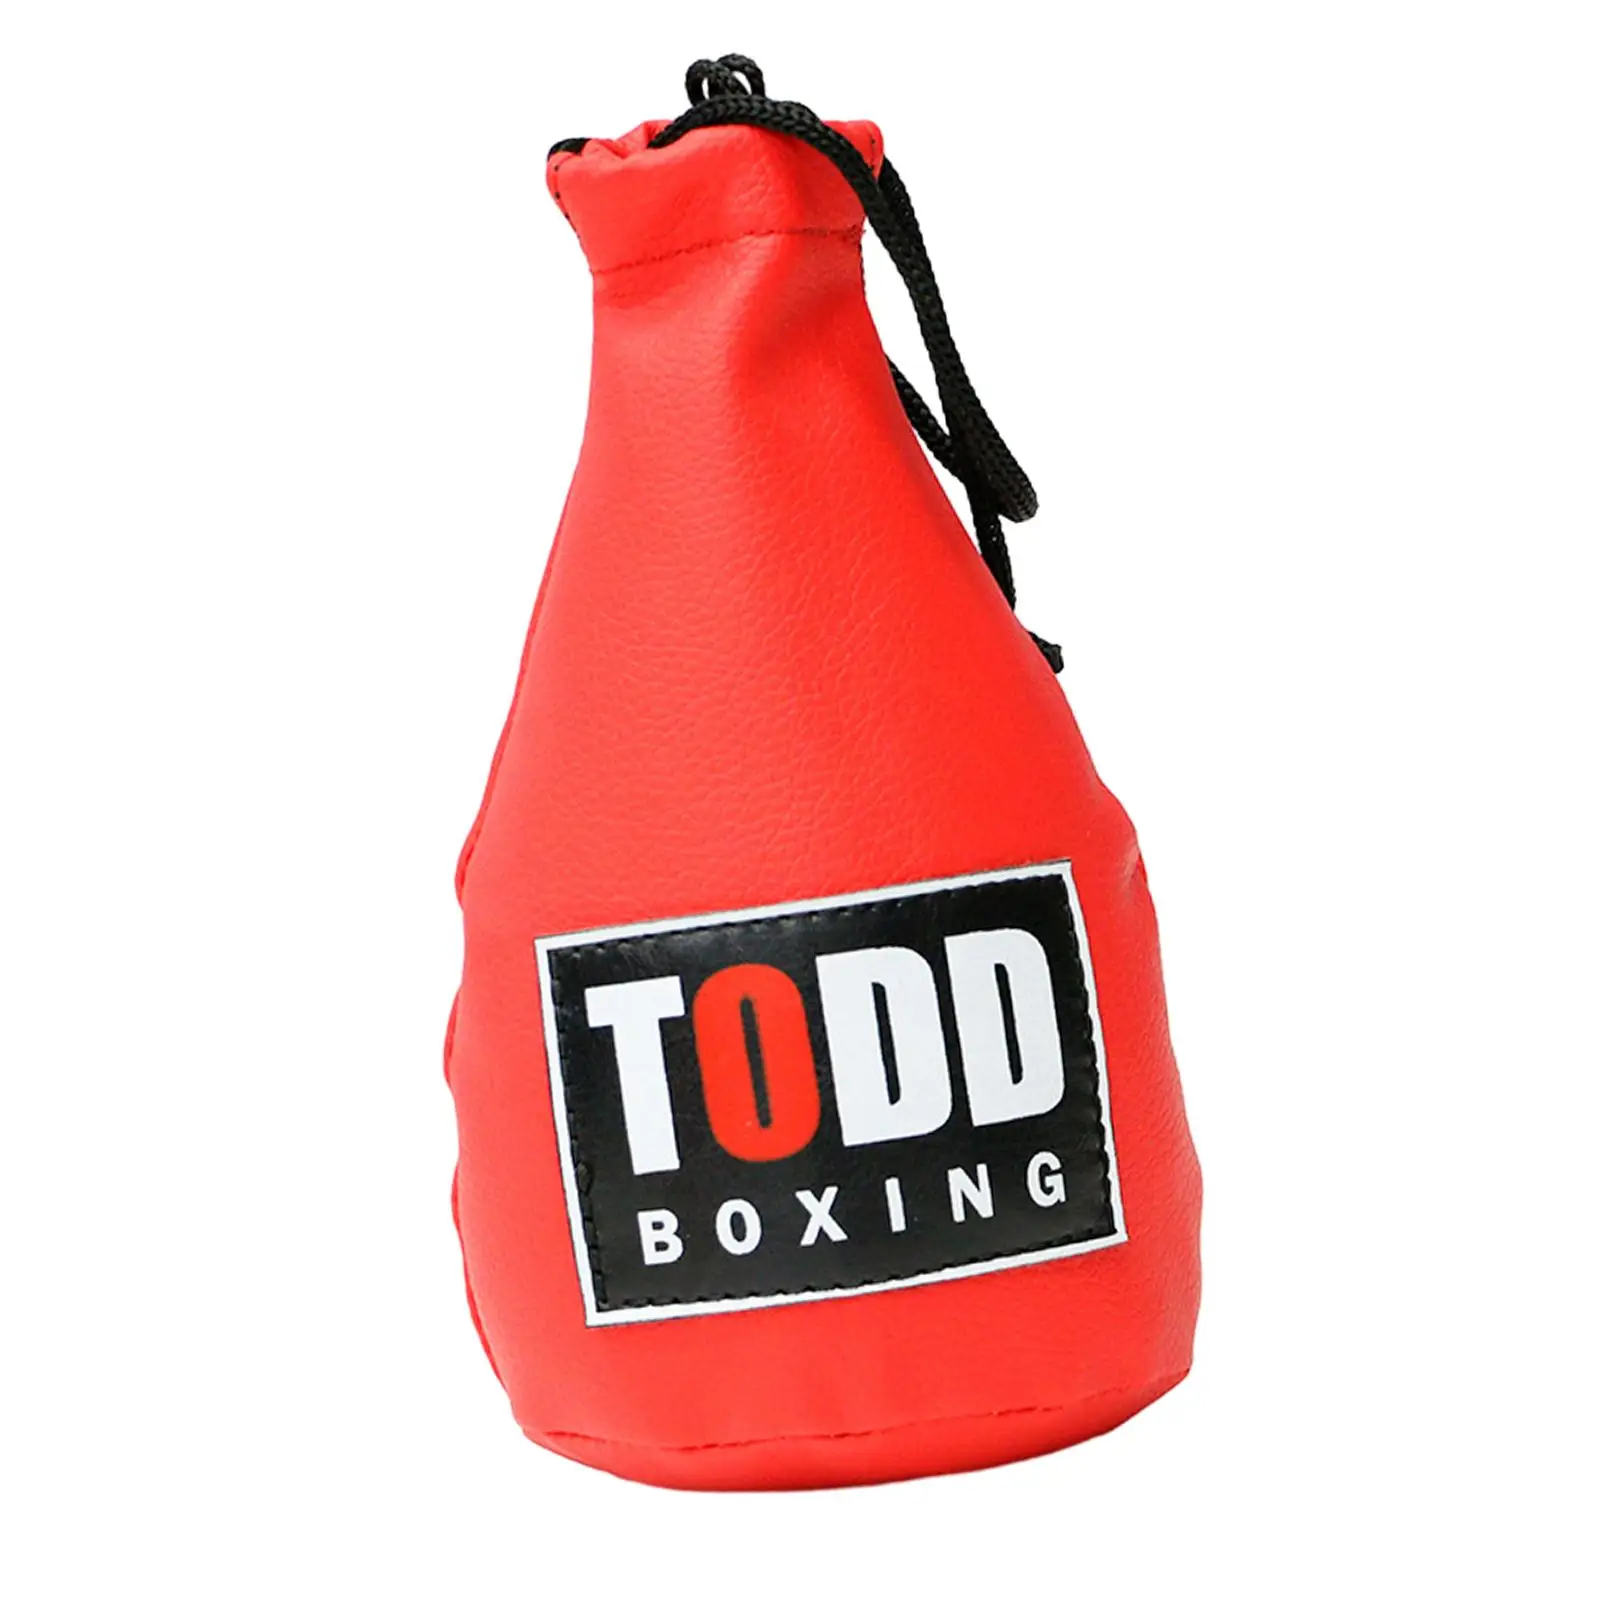 Boxing Punch Bag Punching Bag Equipment Gear Dodge Reaction Bag for Hand Eye Coordination Fight Skill Taekwondo Sports Sparring